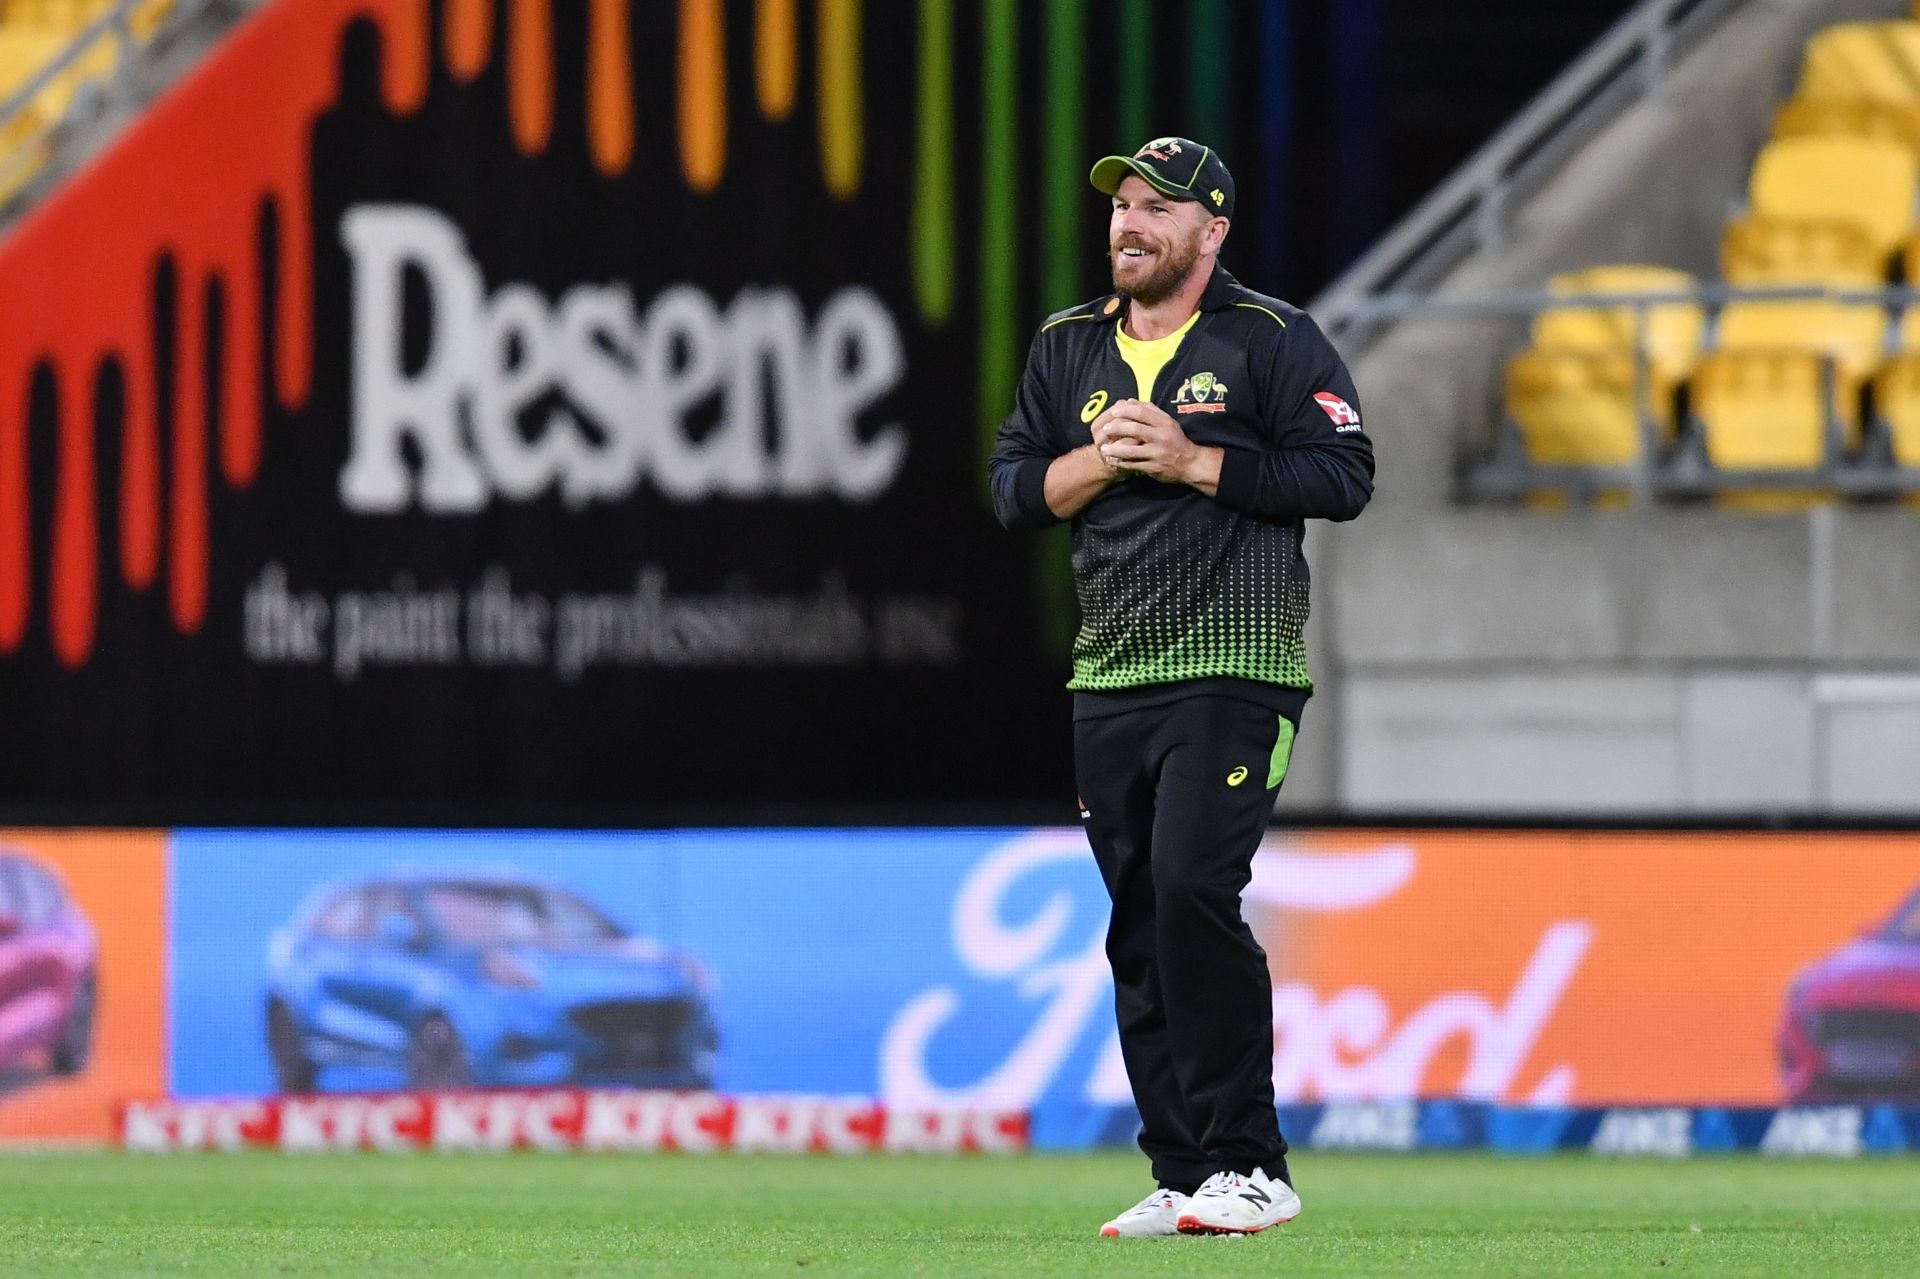 Aaron Finch is the captain of the Australian squad